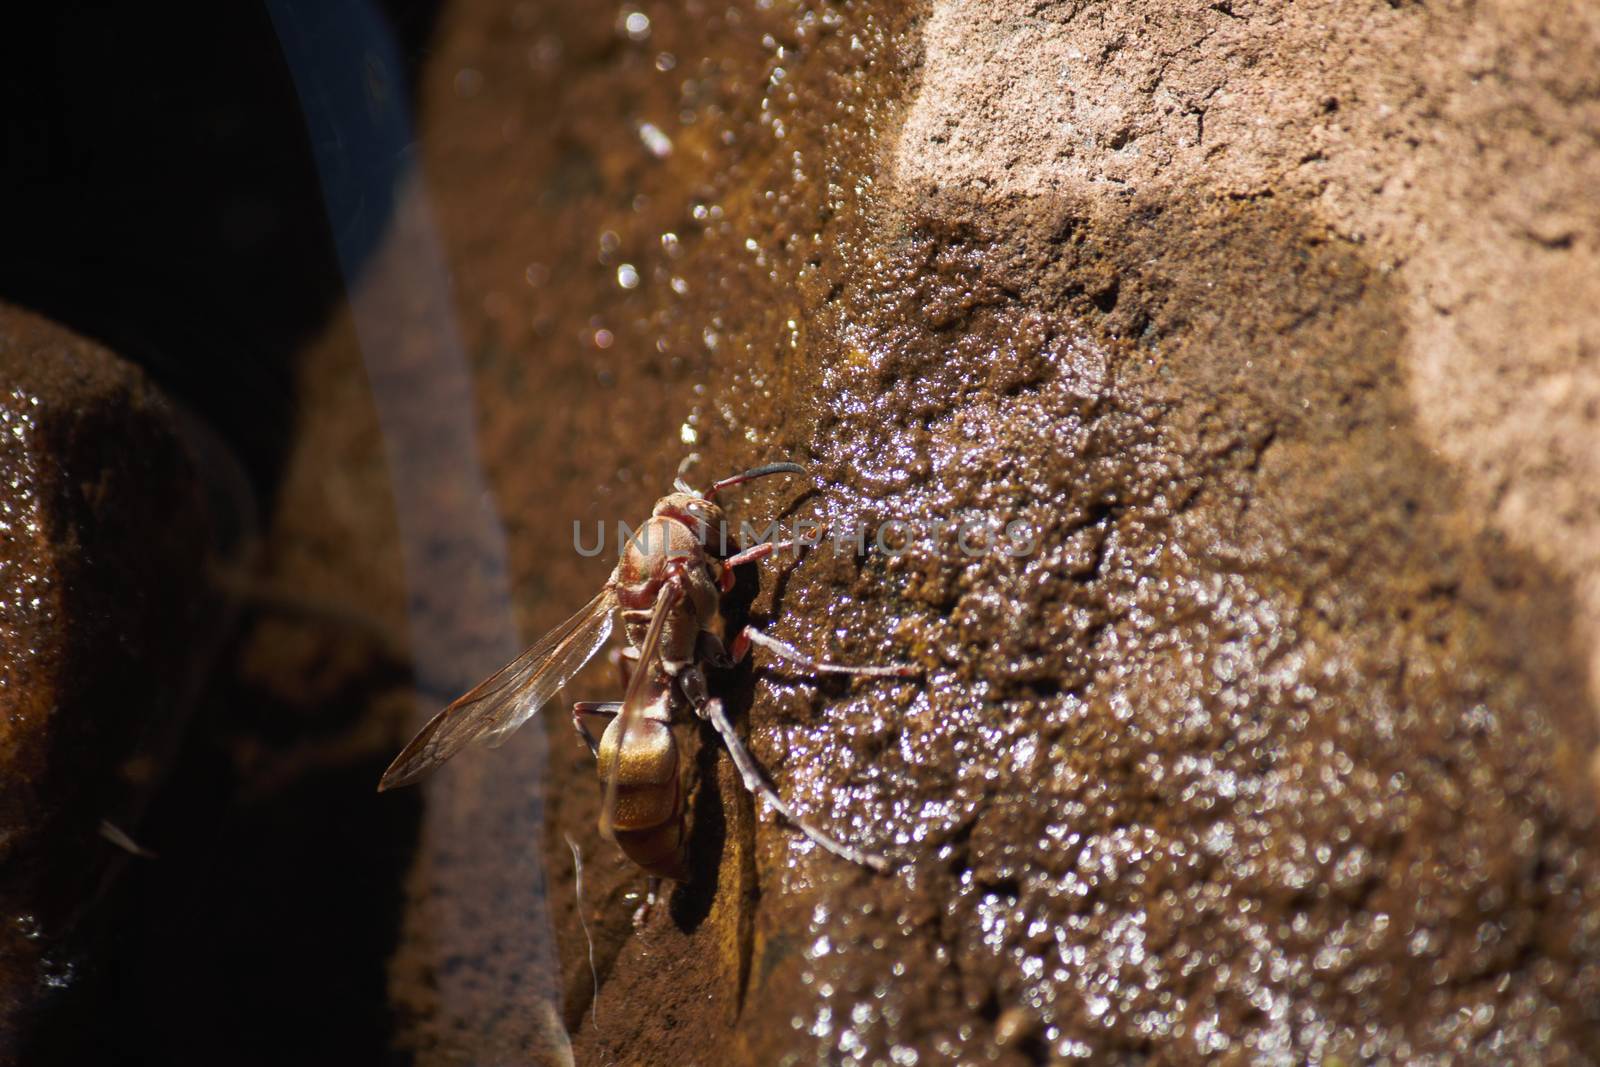 A golden hornet (Vespa sp.) drinks water from a wet rock face near a river stream in forest, Limpopo, South Africa